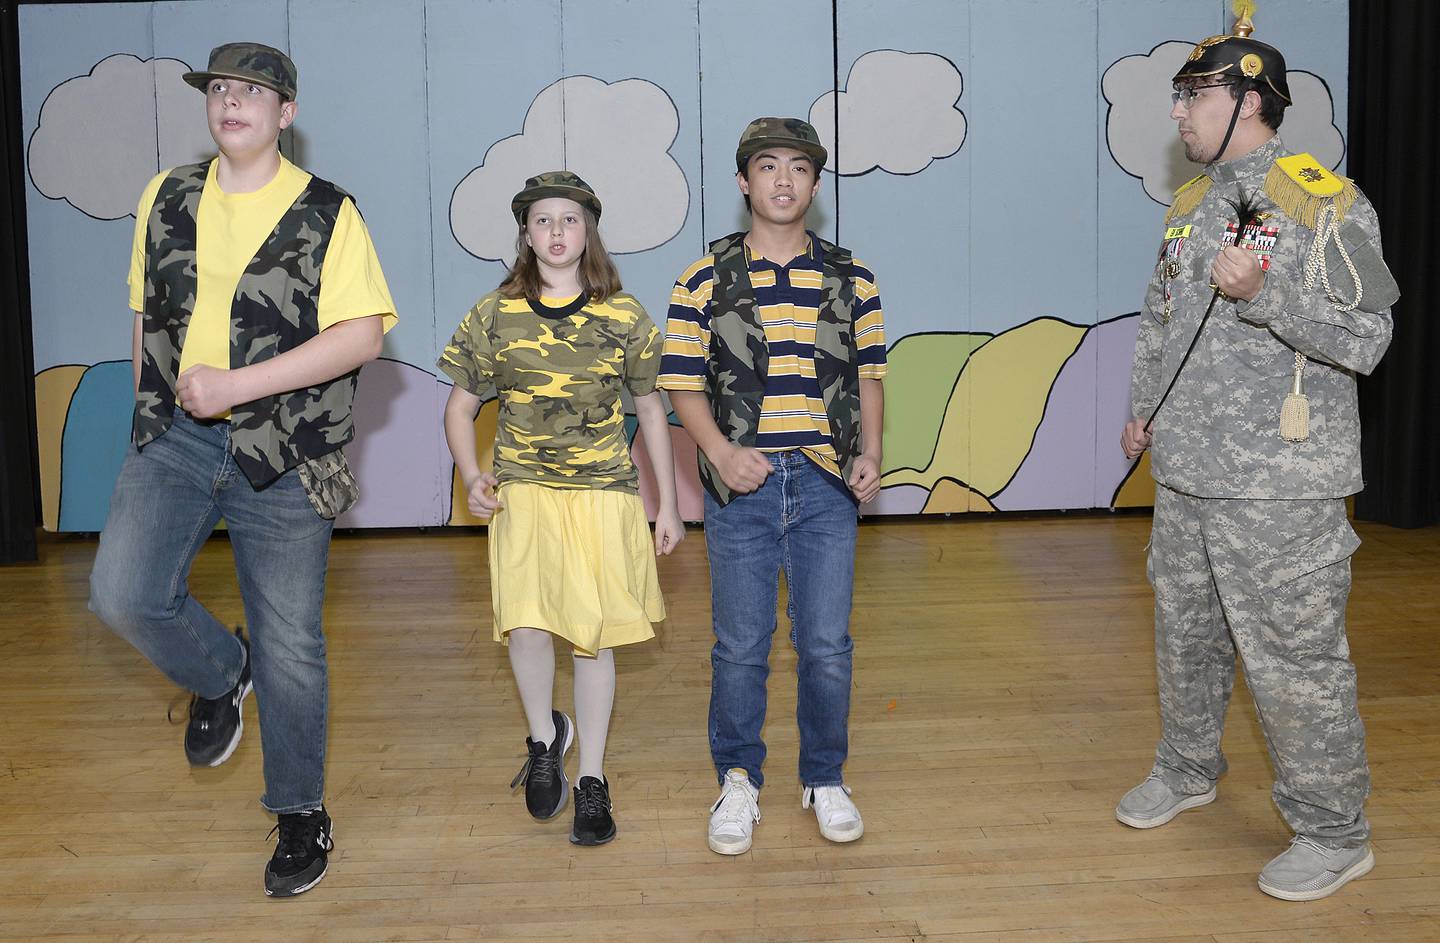 Marquette Academy students (left to right) Frank Reynolds, Ceci Reynolds and Ben Weyer, as Who Cadets, with Rilee Lieske, as General Genghis Khan Schmit, perform in a scene from "Seussical The Musical."